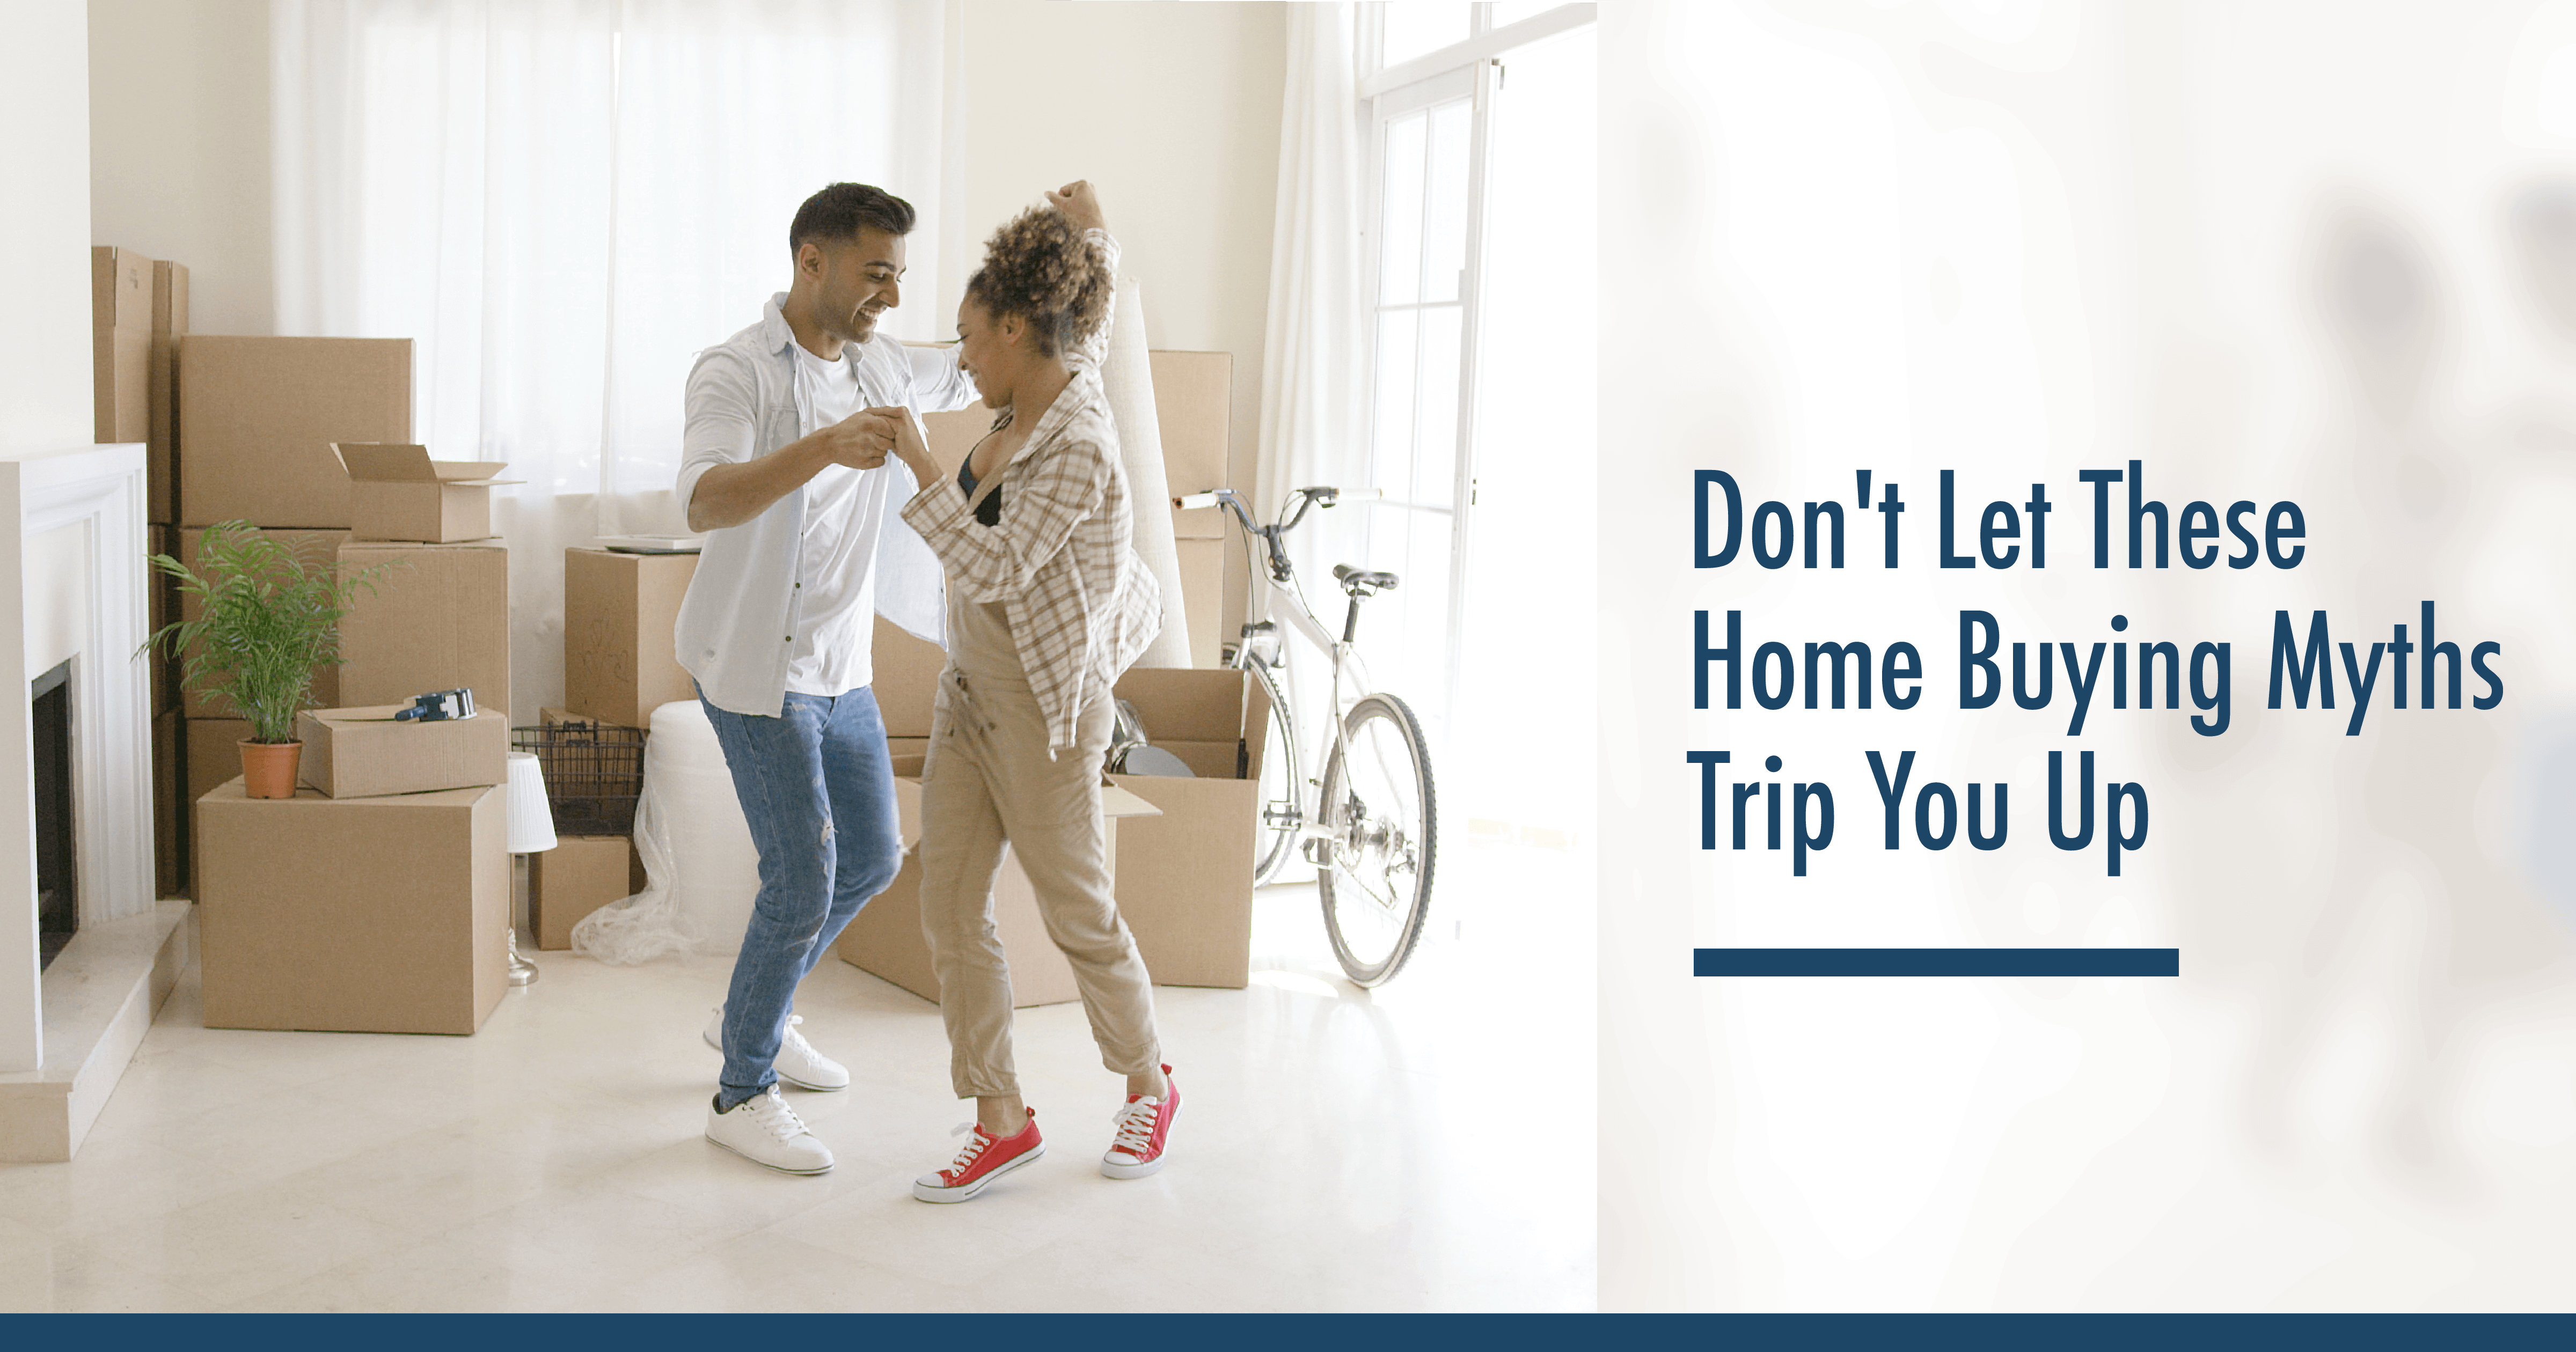 Top 10 Myths That Trip Up First-Time Home Buyers